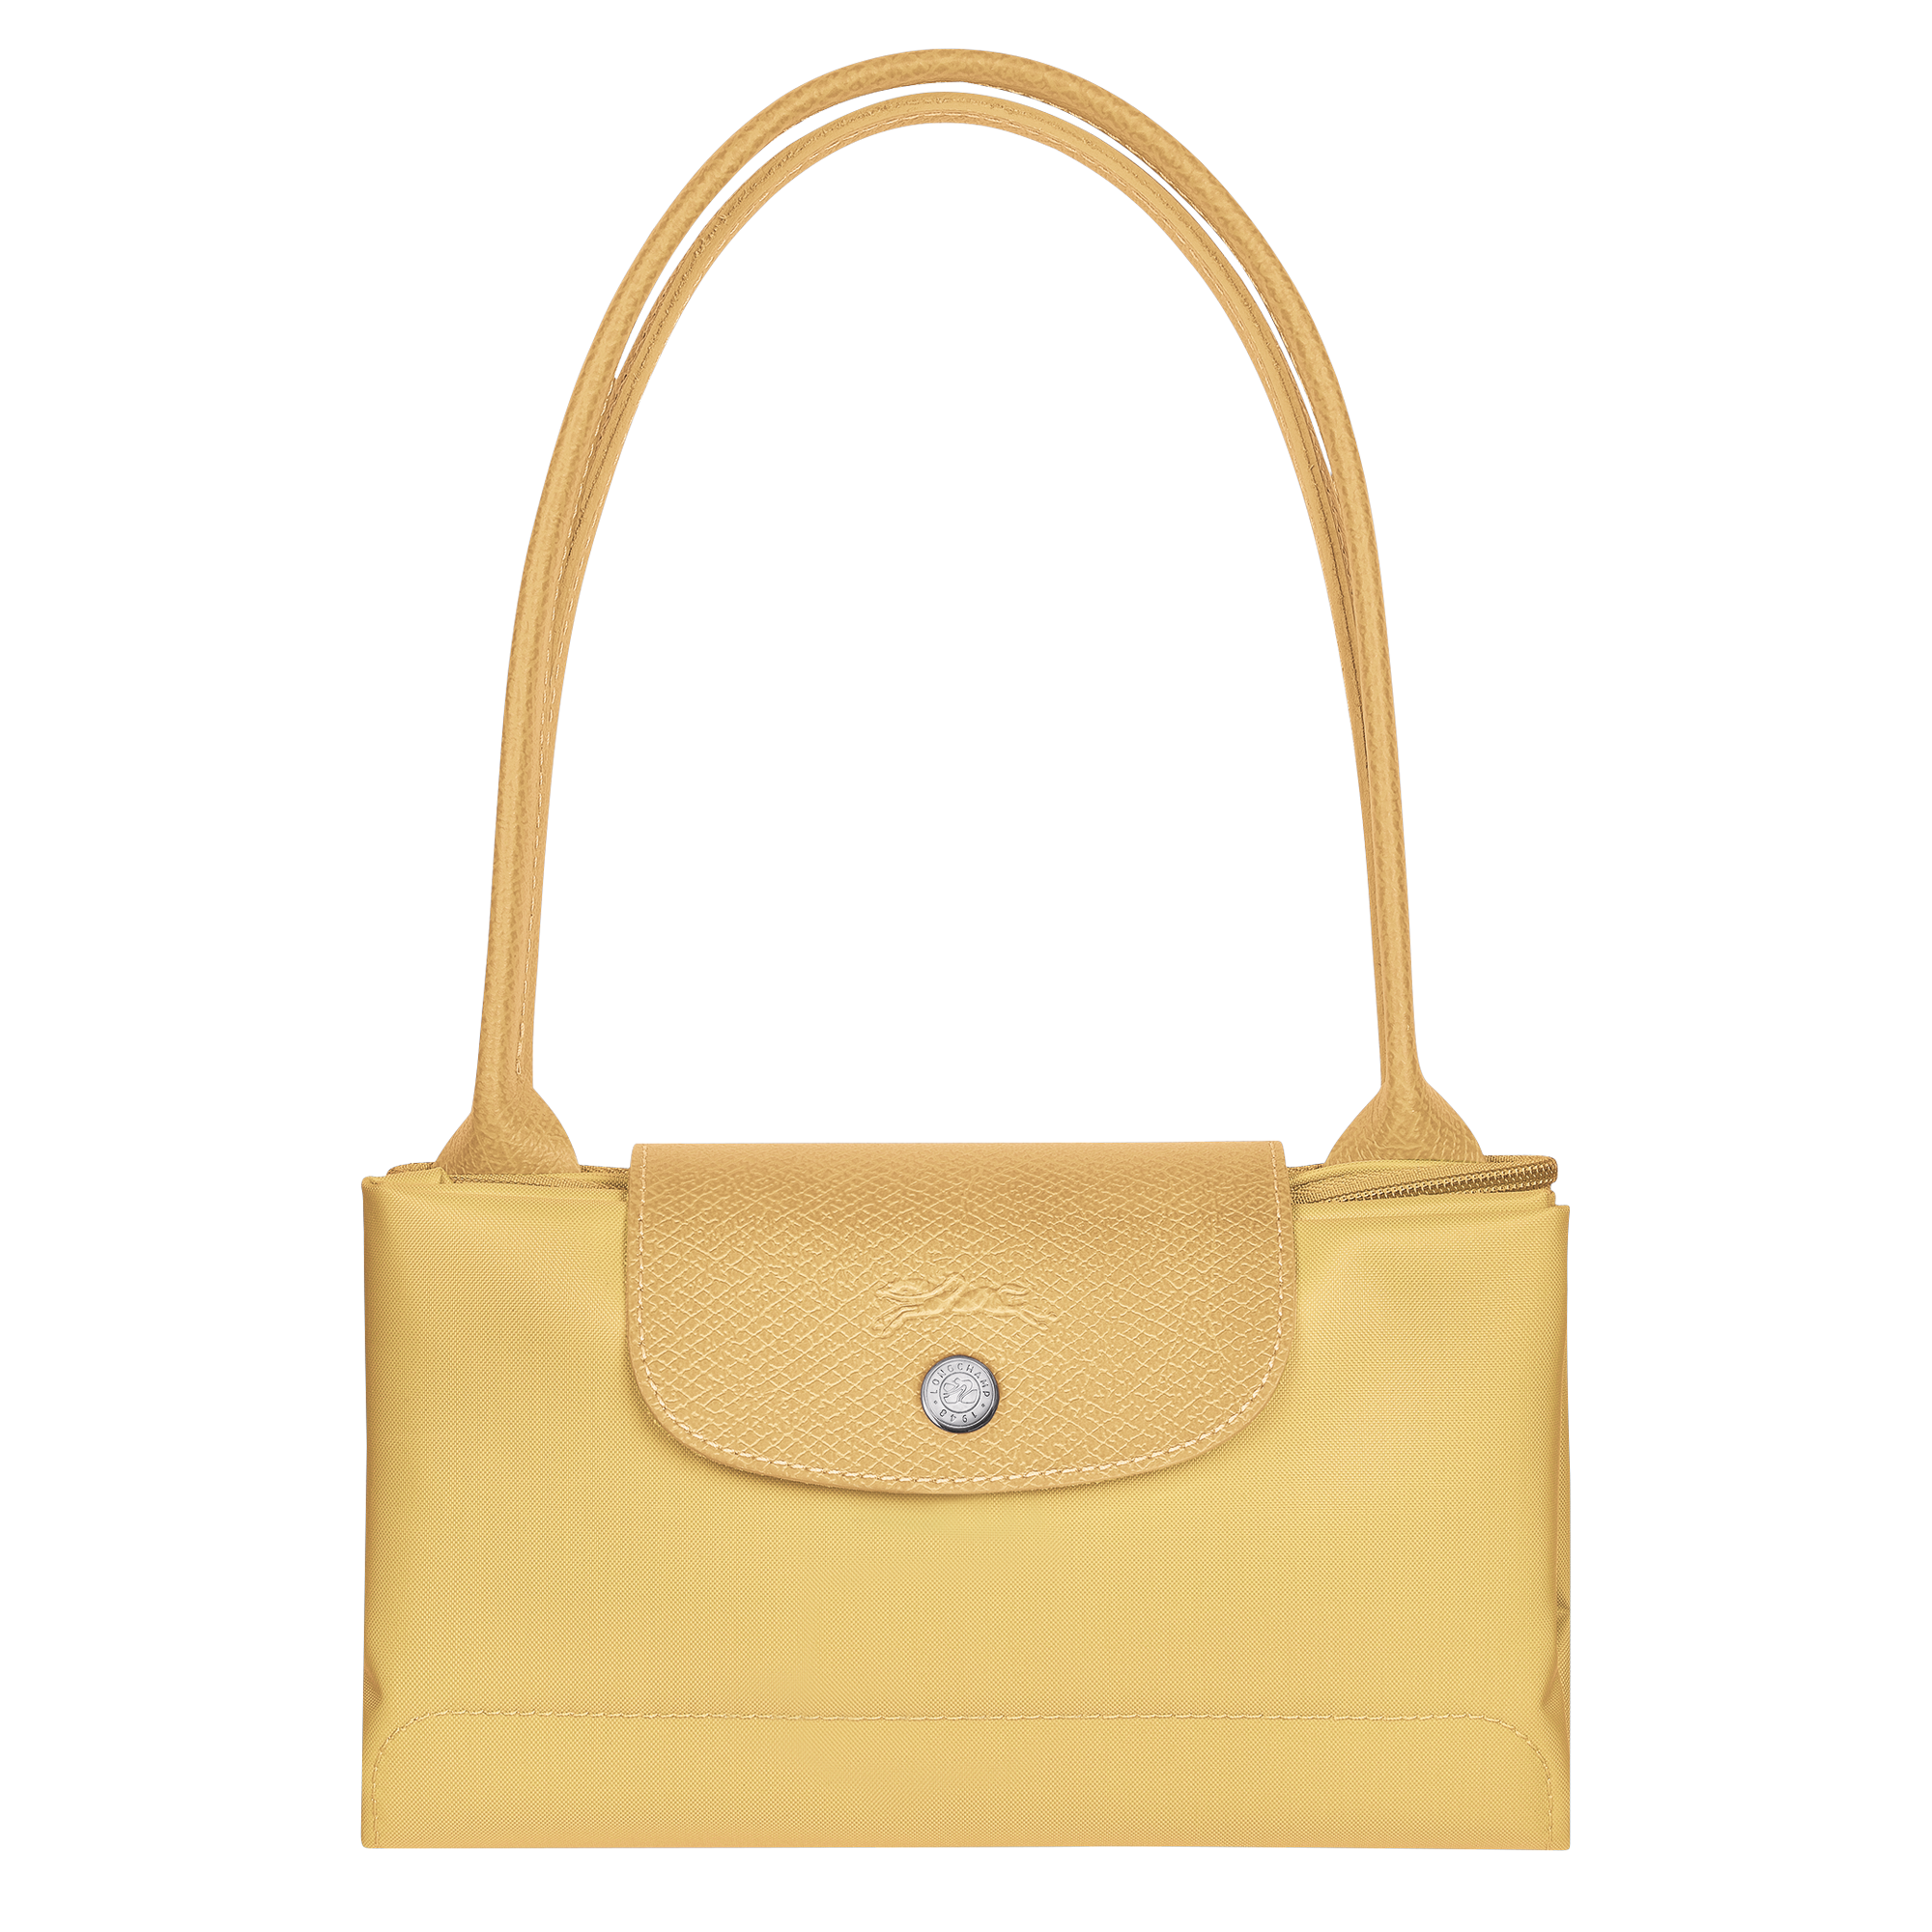 Longchamp pouch with handle in Wheat